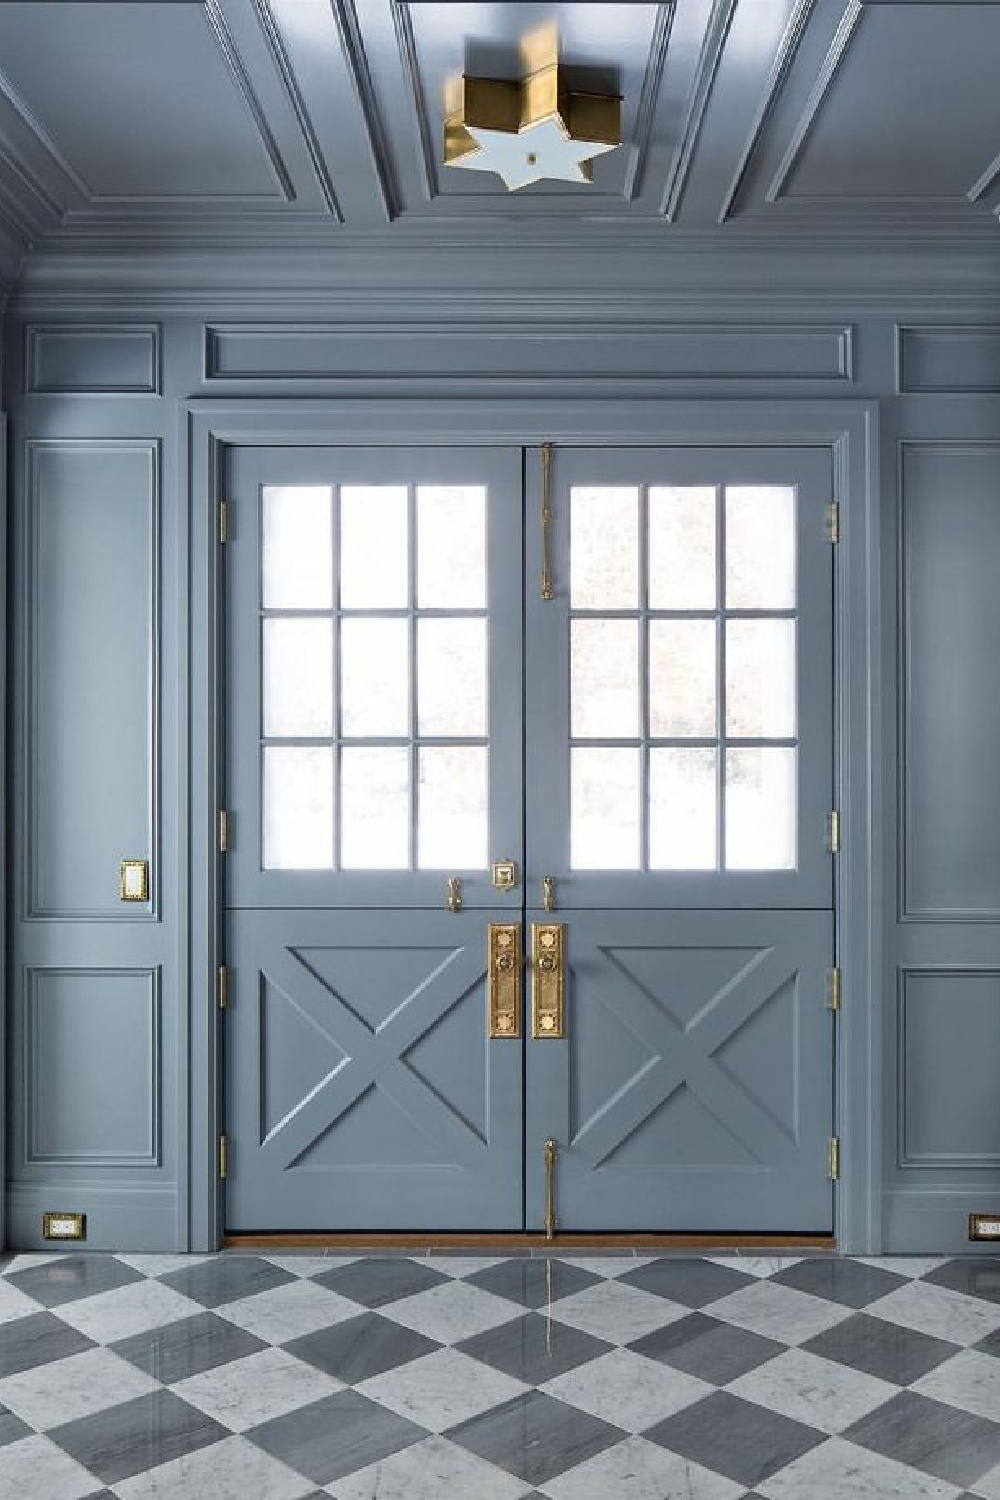 Blue grey painted paneling in a traditional home's entry with checkered flooring. Design by The Fox Group. #paneling #thefoxgroup #bluegray #entry #brasshardware